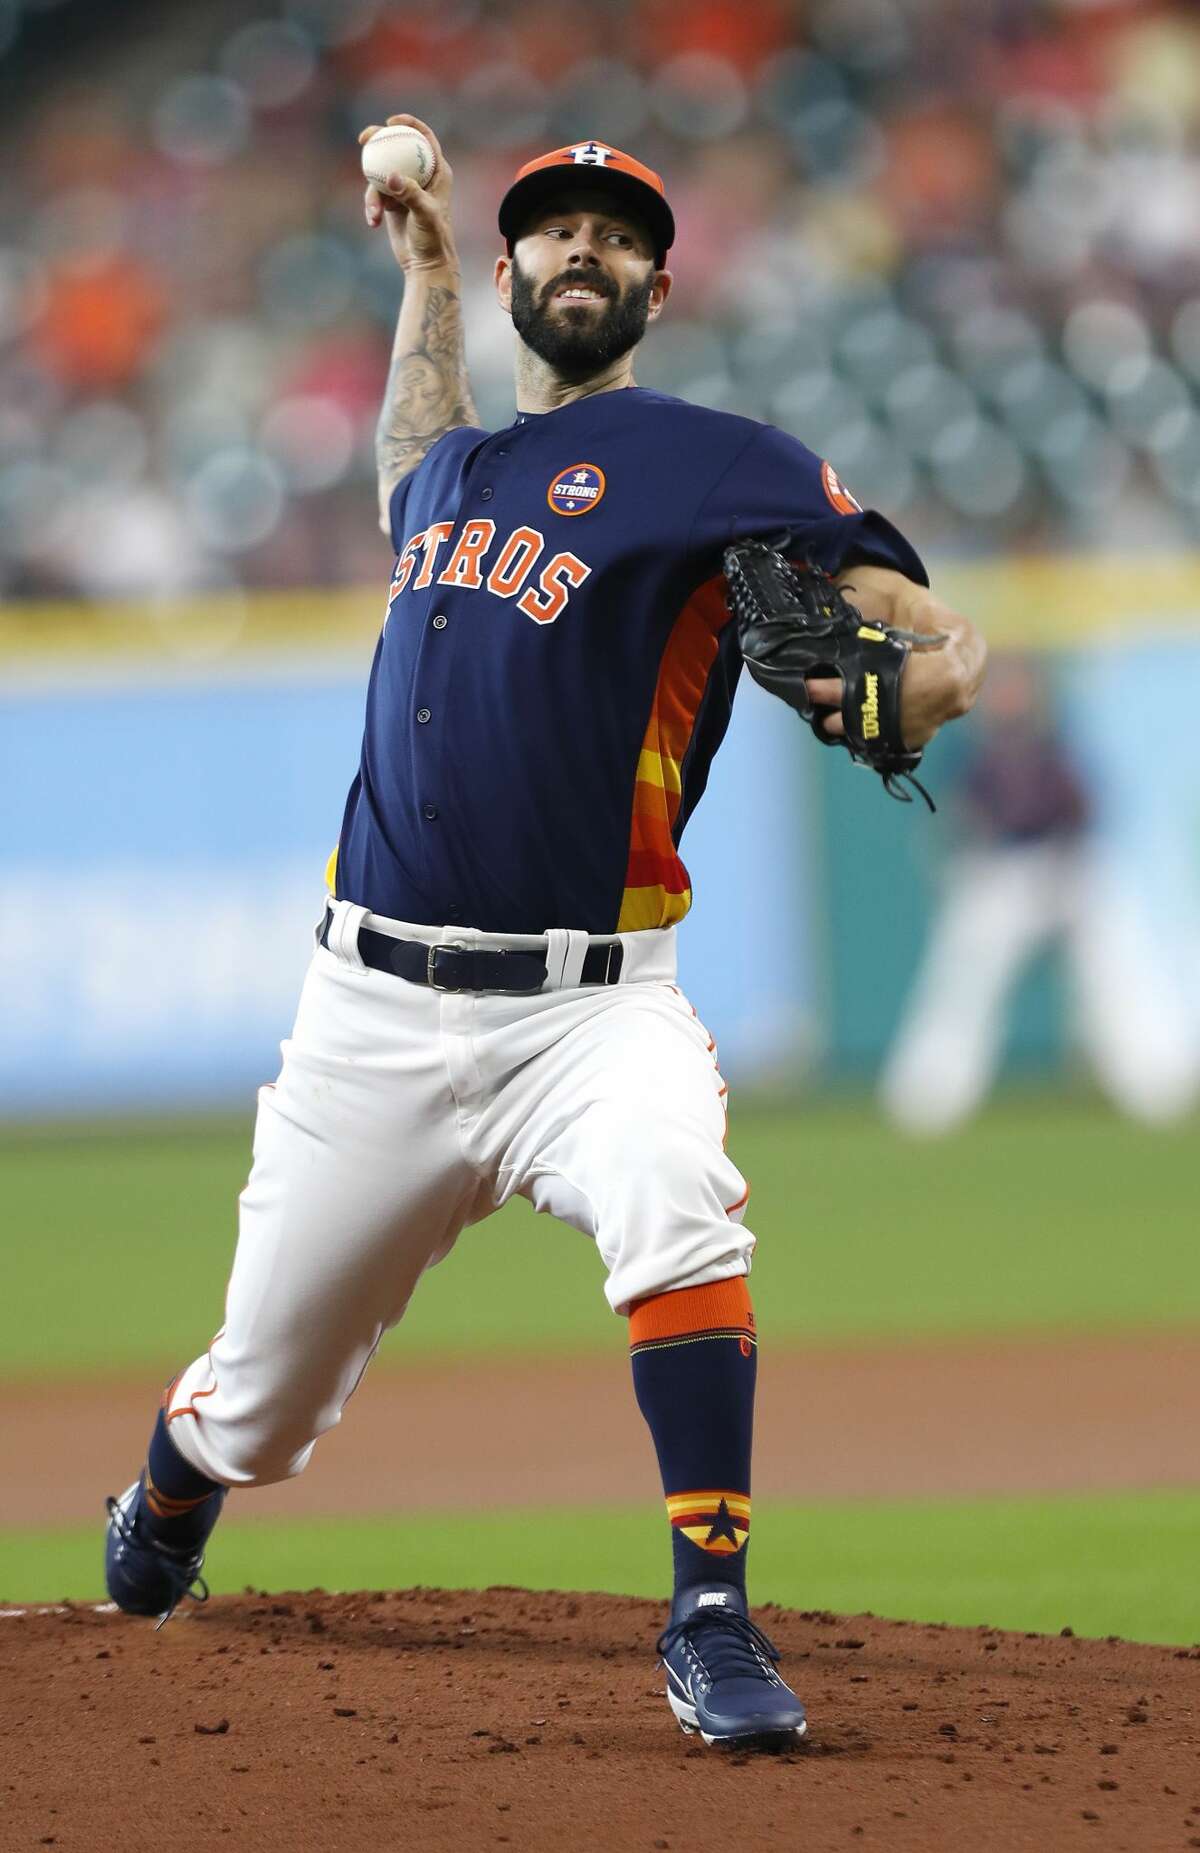 Houston Astros starting pitcher Mike Fiers (54) pitches during the first inning of an MLB baseball game at Minute Maid Park, Sunday, Sept. 3, 2017, in Houston. ( Karen Warren / Houston Chronicle )